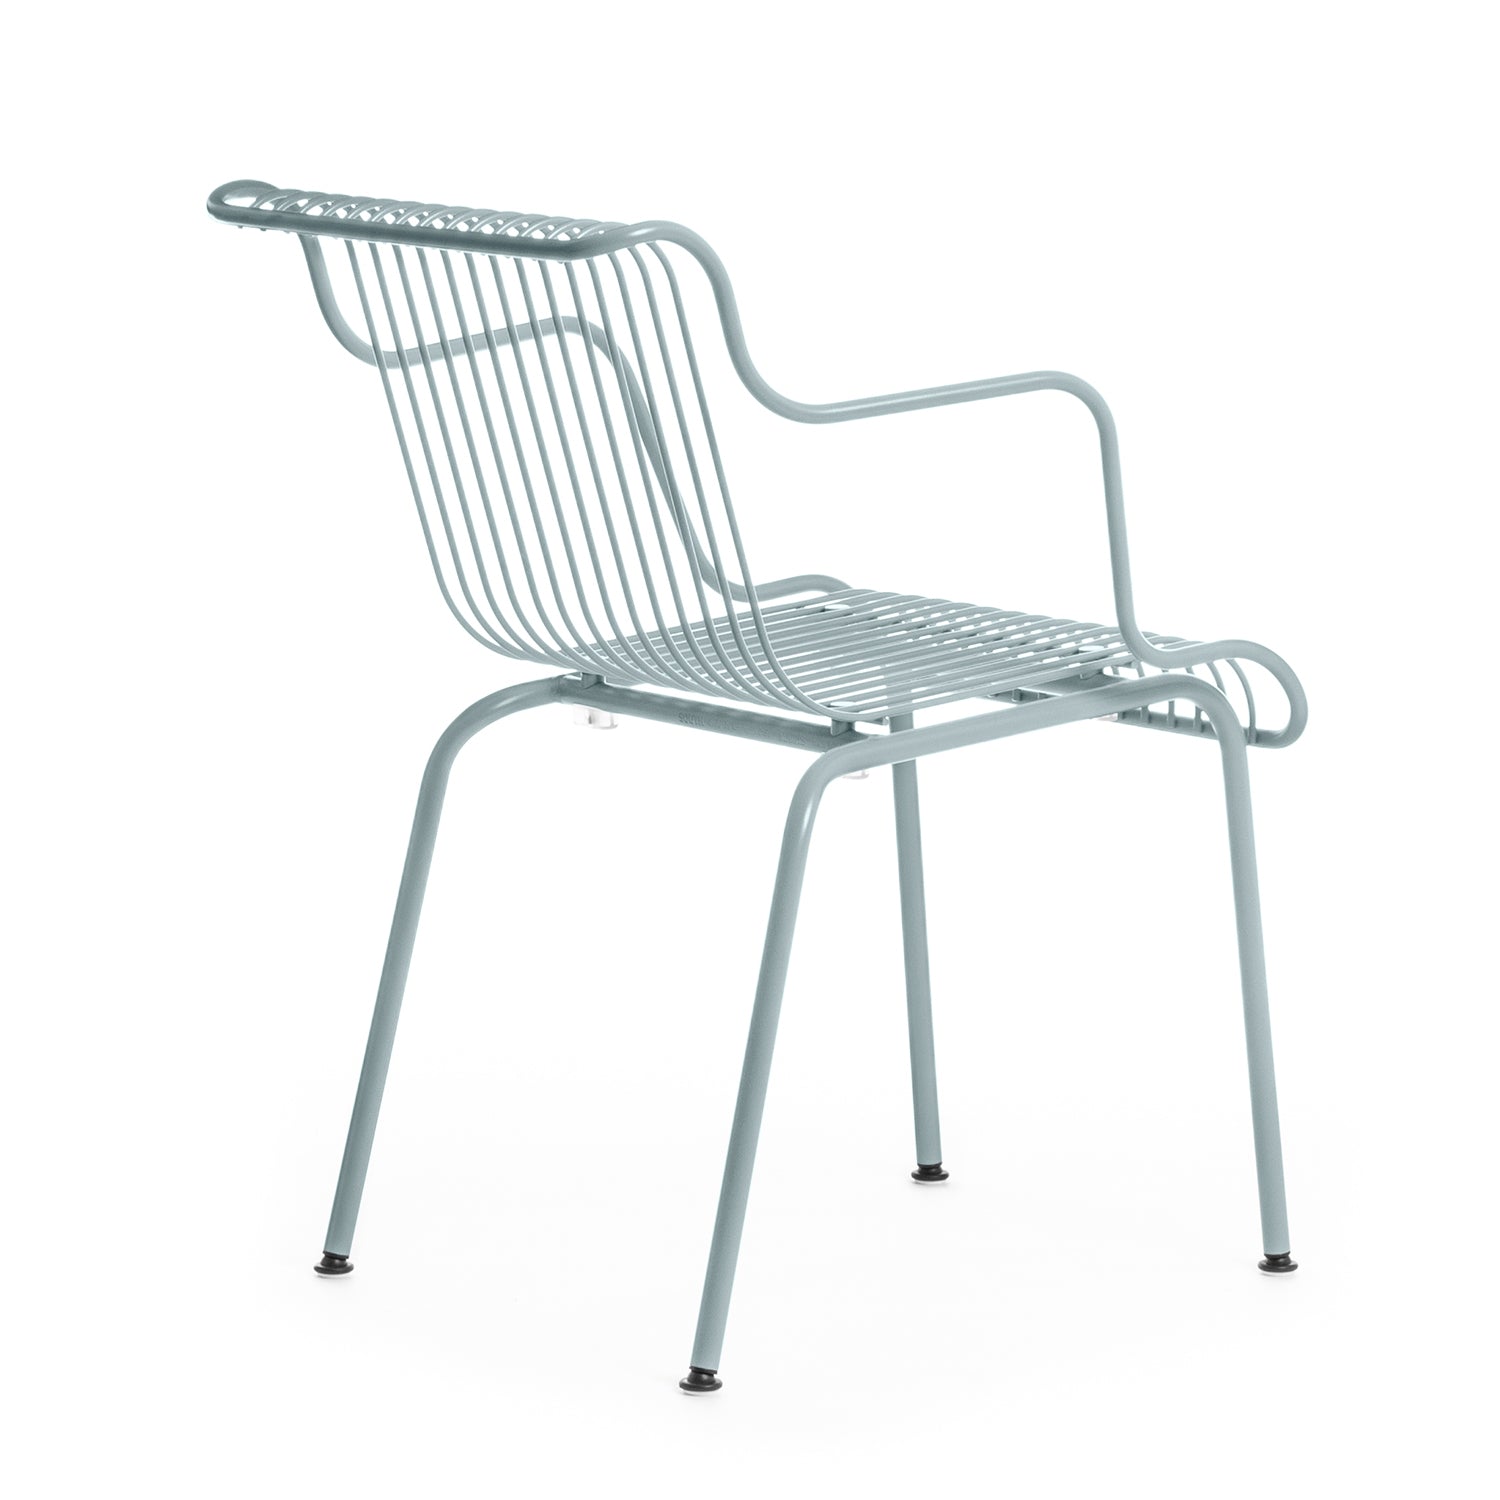 Magis South Dining Armchair in light blue